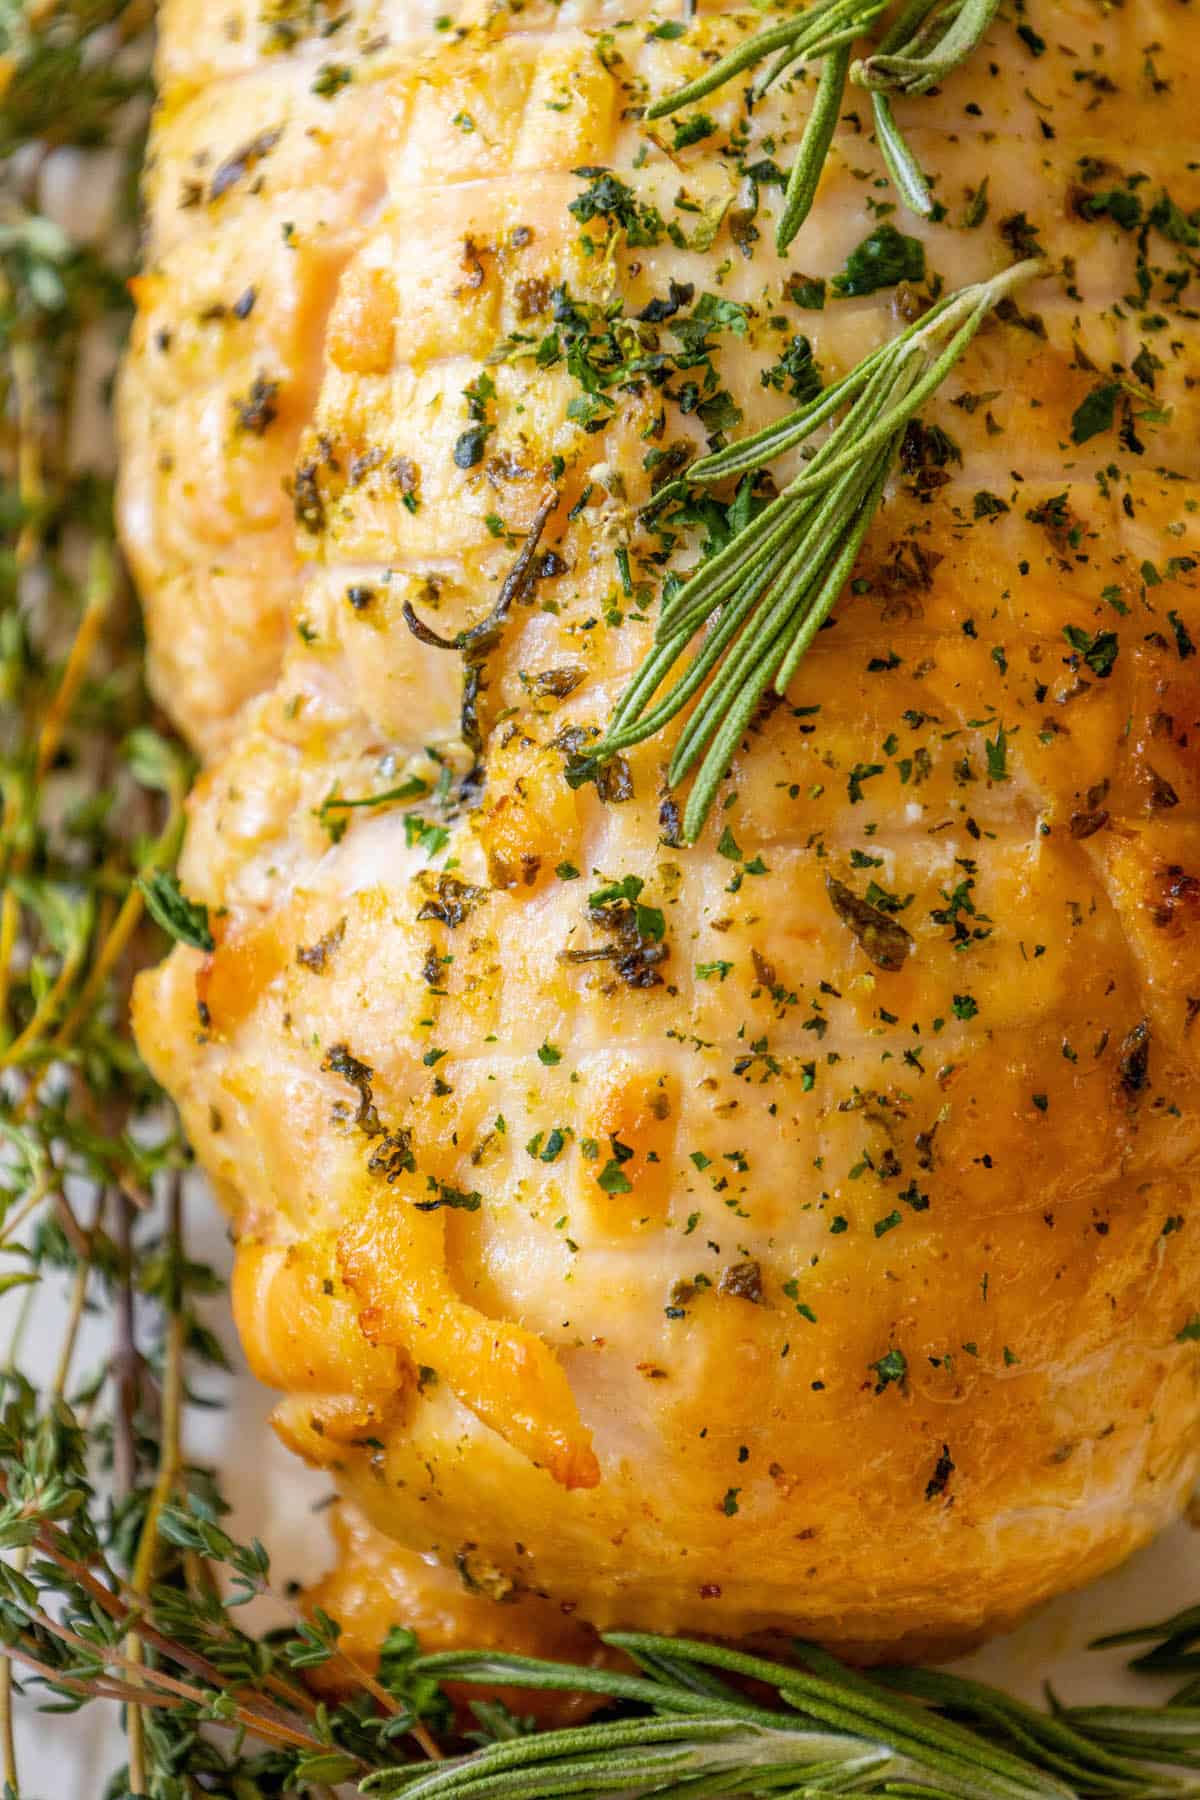 A roasted chicken on a plate with rosemary sprigs and an oven-baked turkey breast.